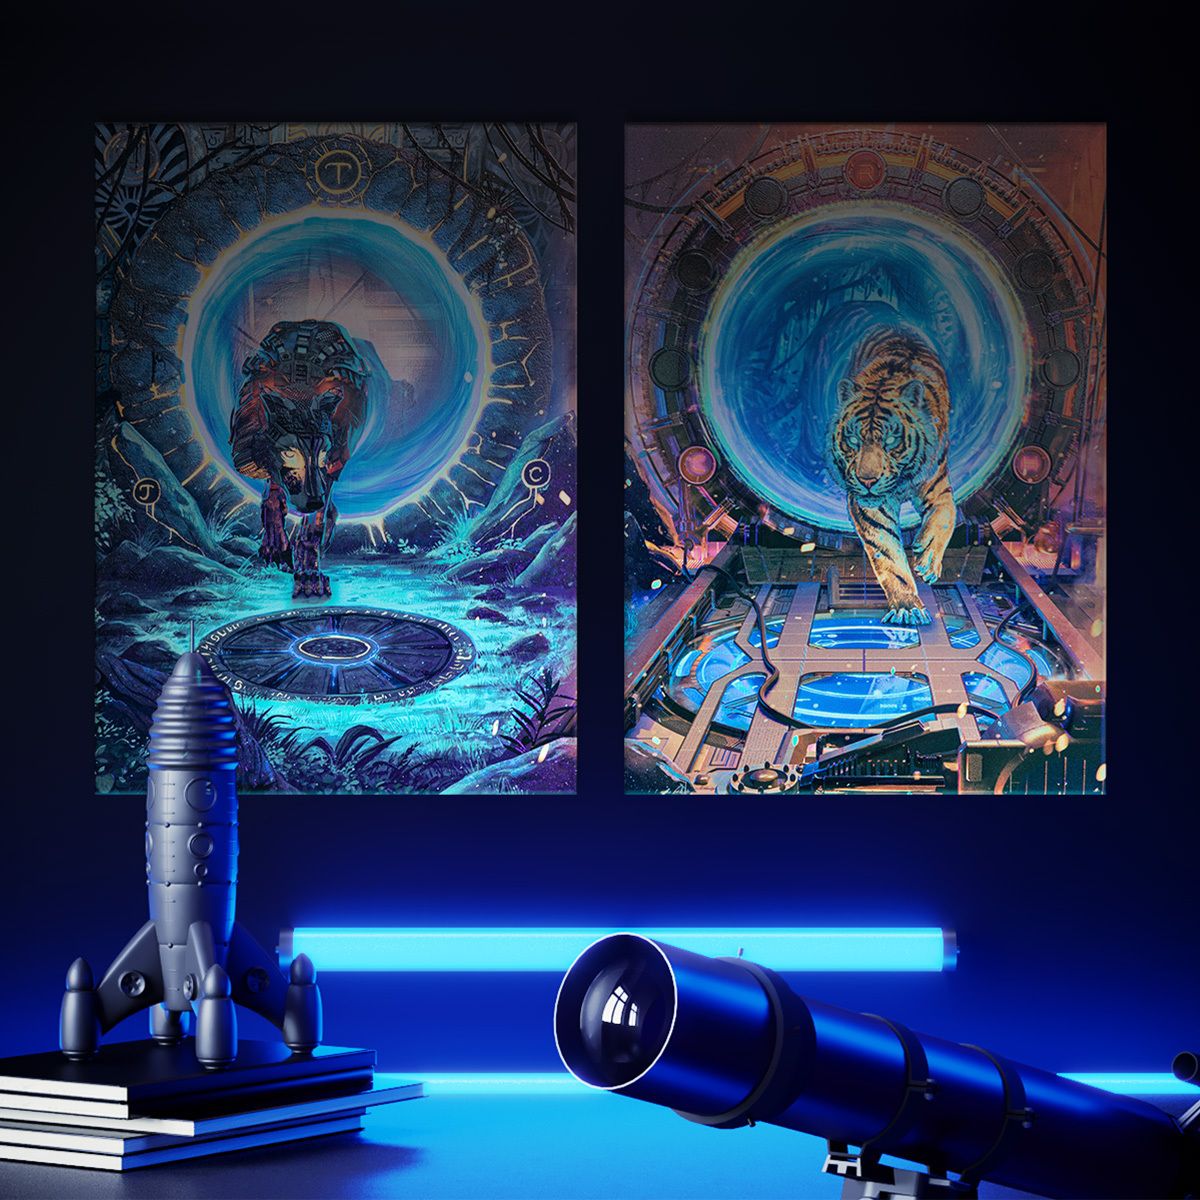 one piece posters - metal posters - Displate